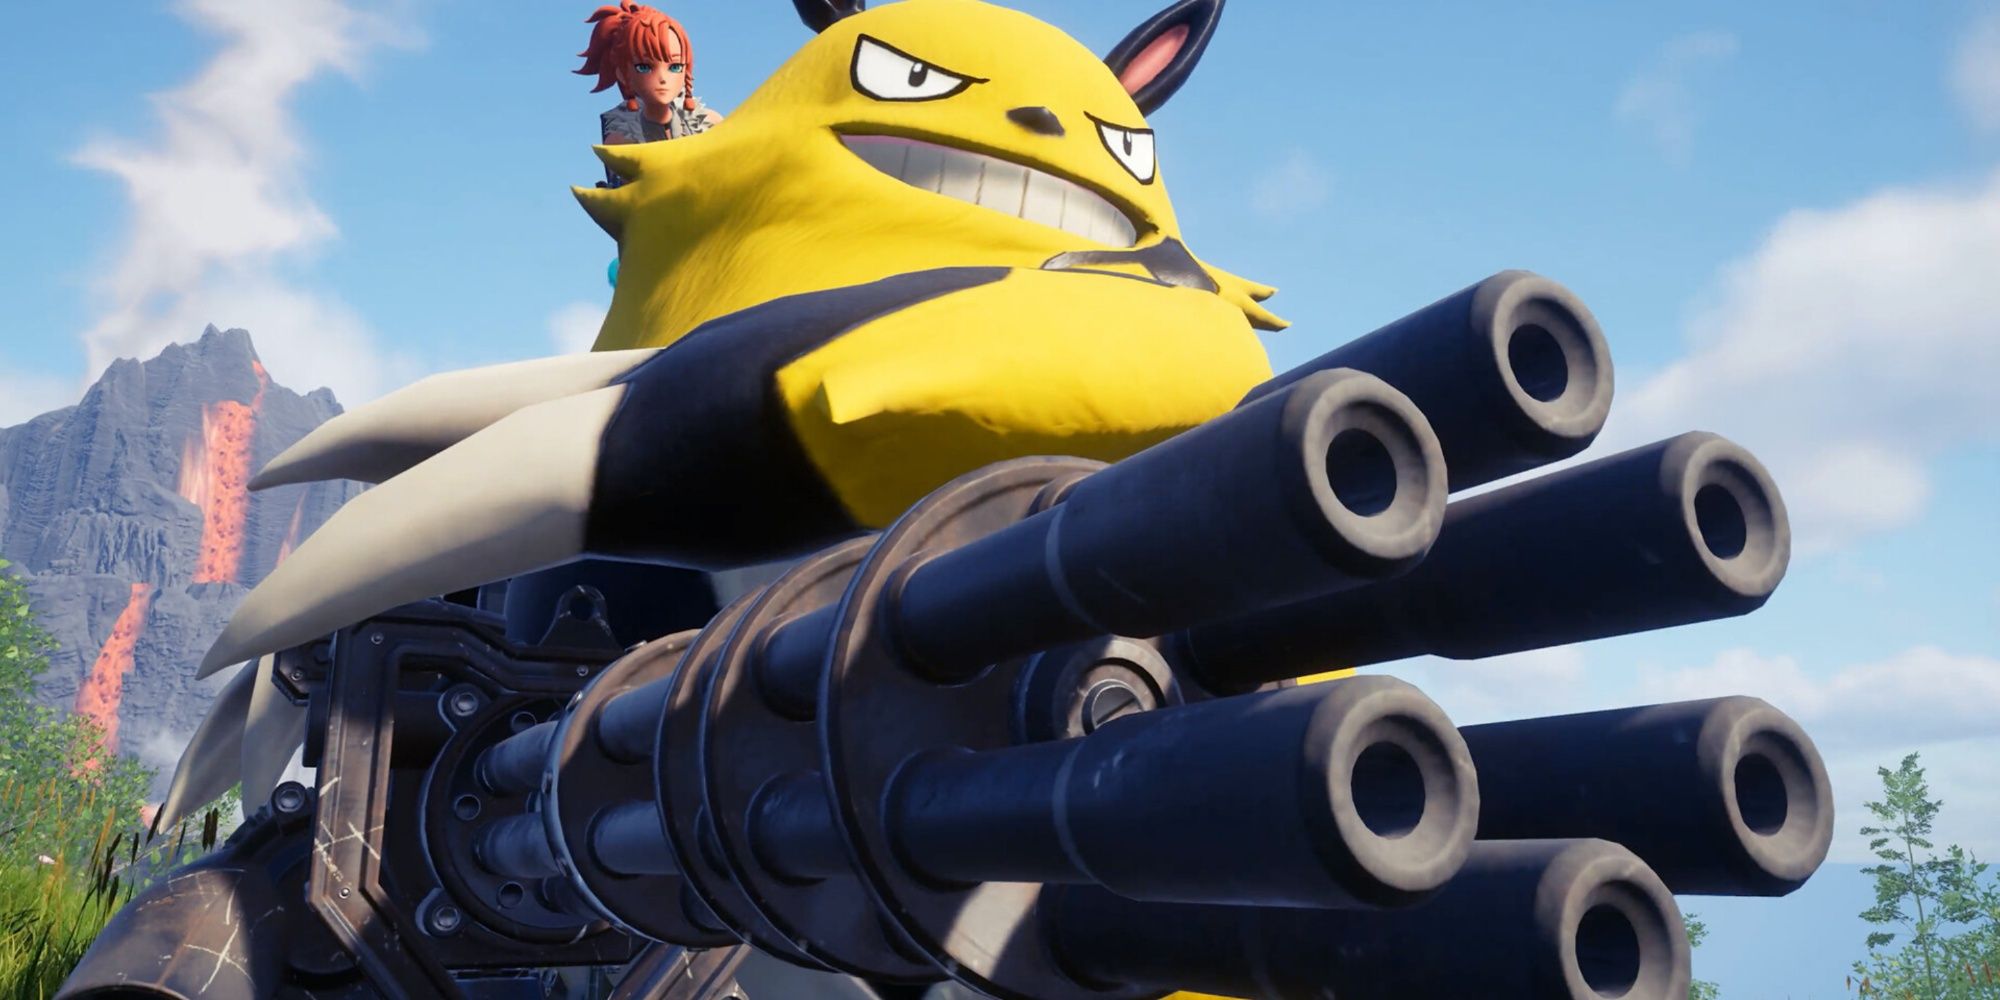 Palworld Giant Yellow Monster With A Minigun